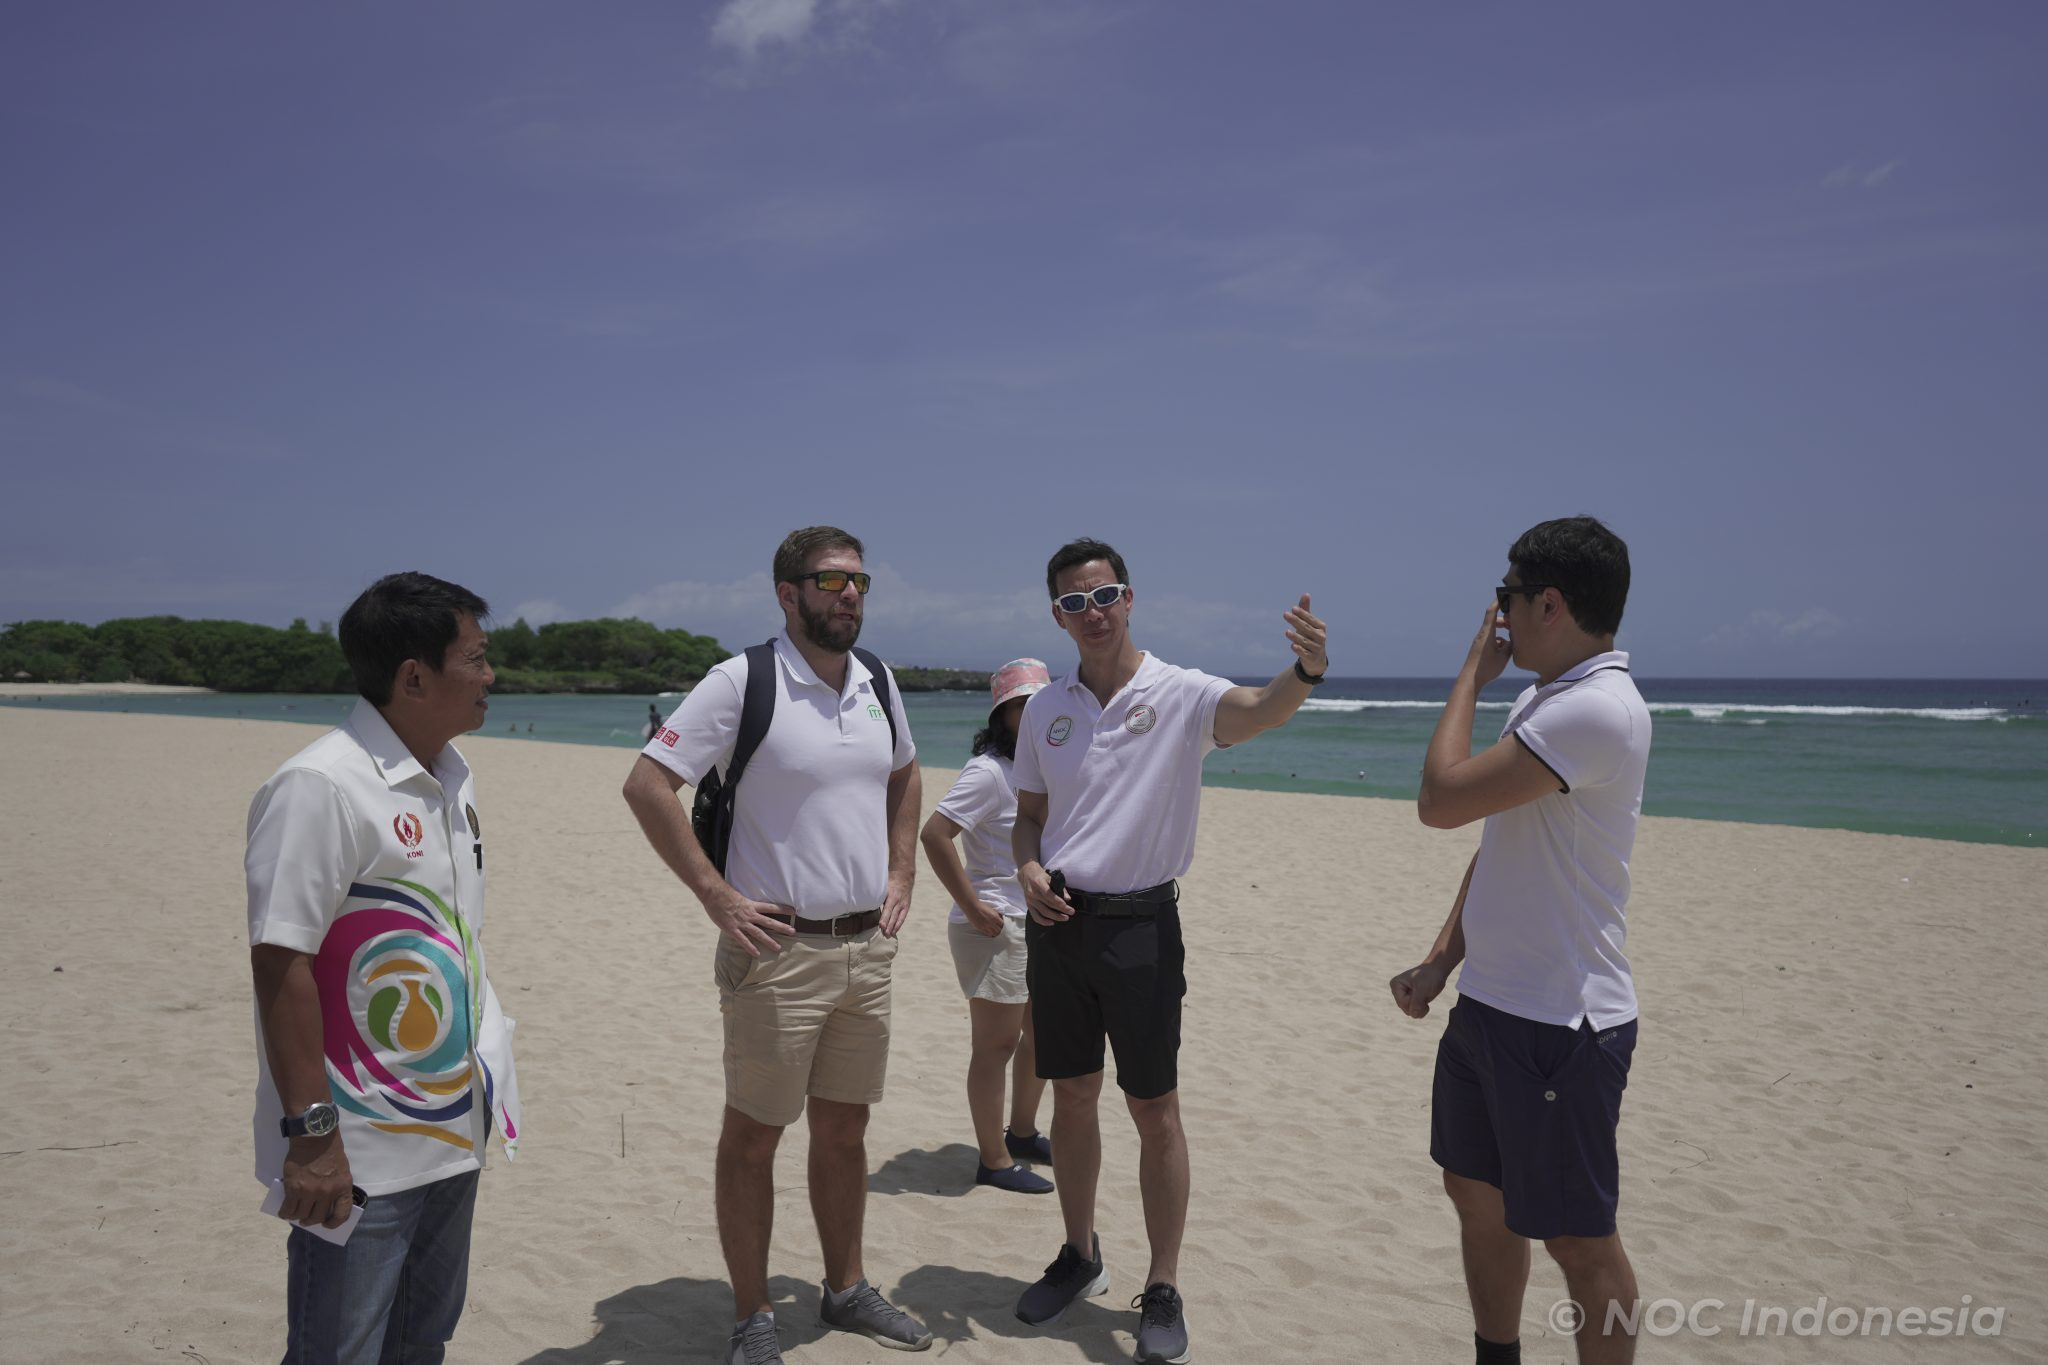 ANOC has held technical meetings with three sporting bodies in Bali ©NOC Indonesia